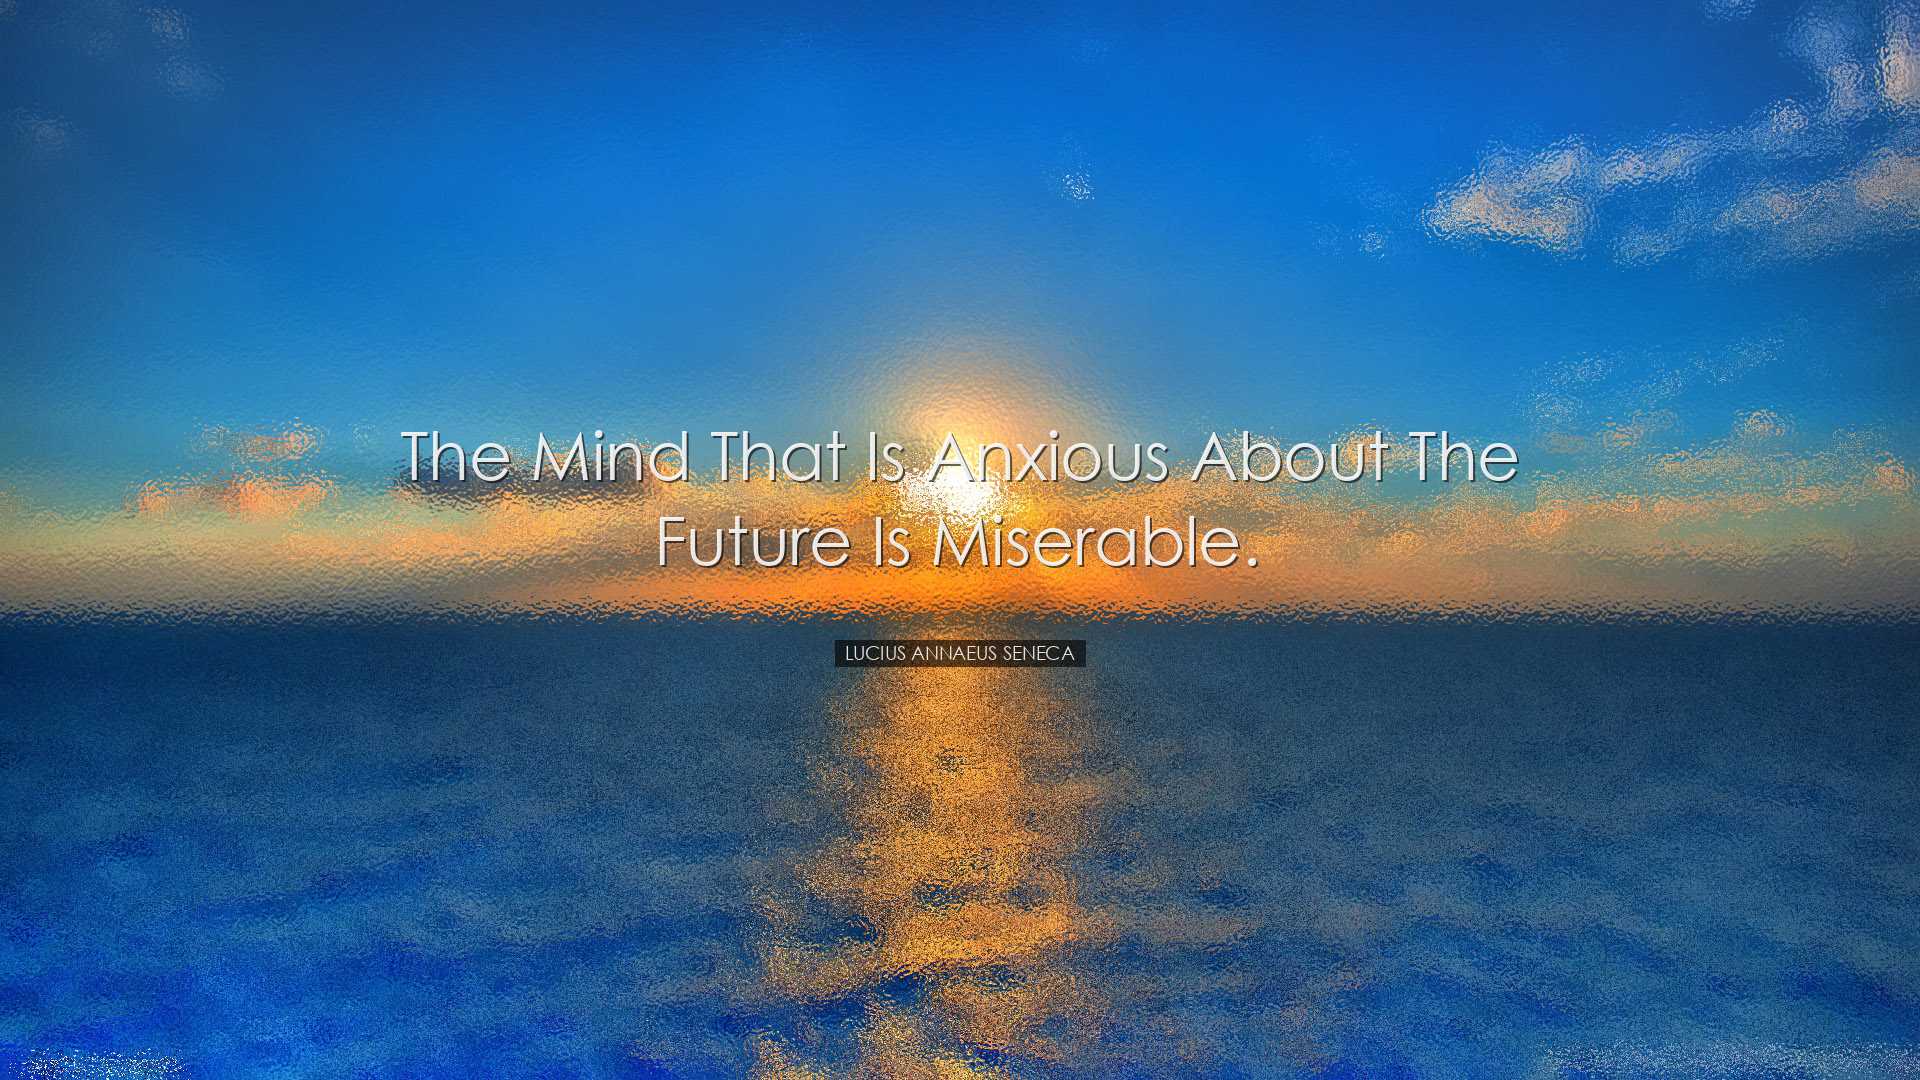 The mind that is anxious about the future is miserable. - Lucius A